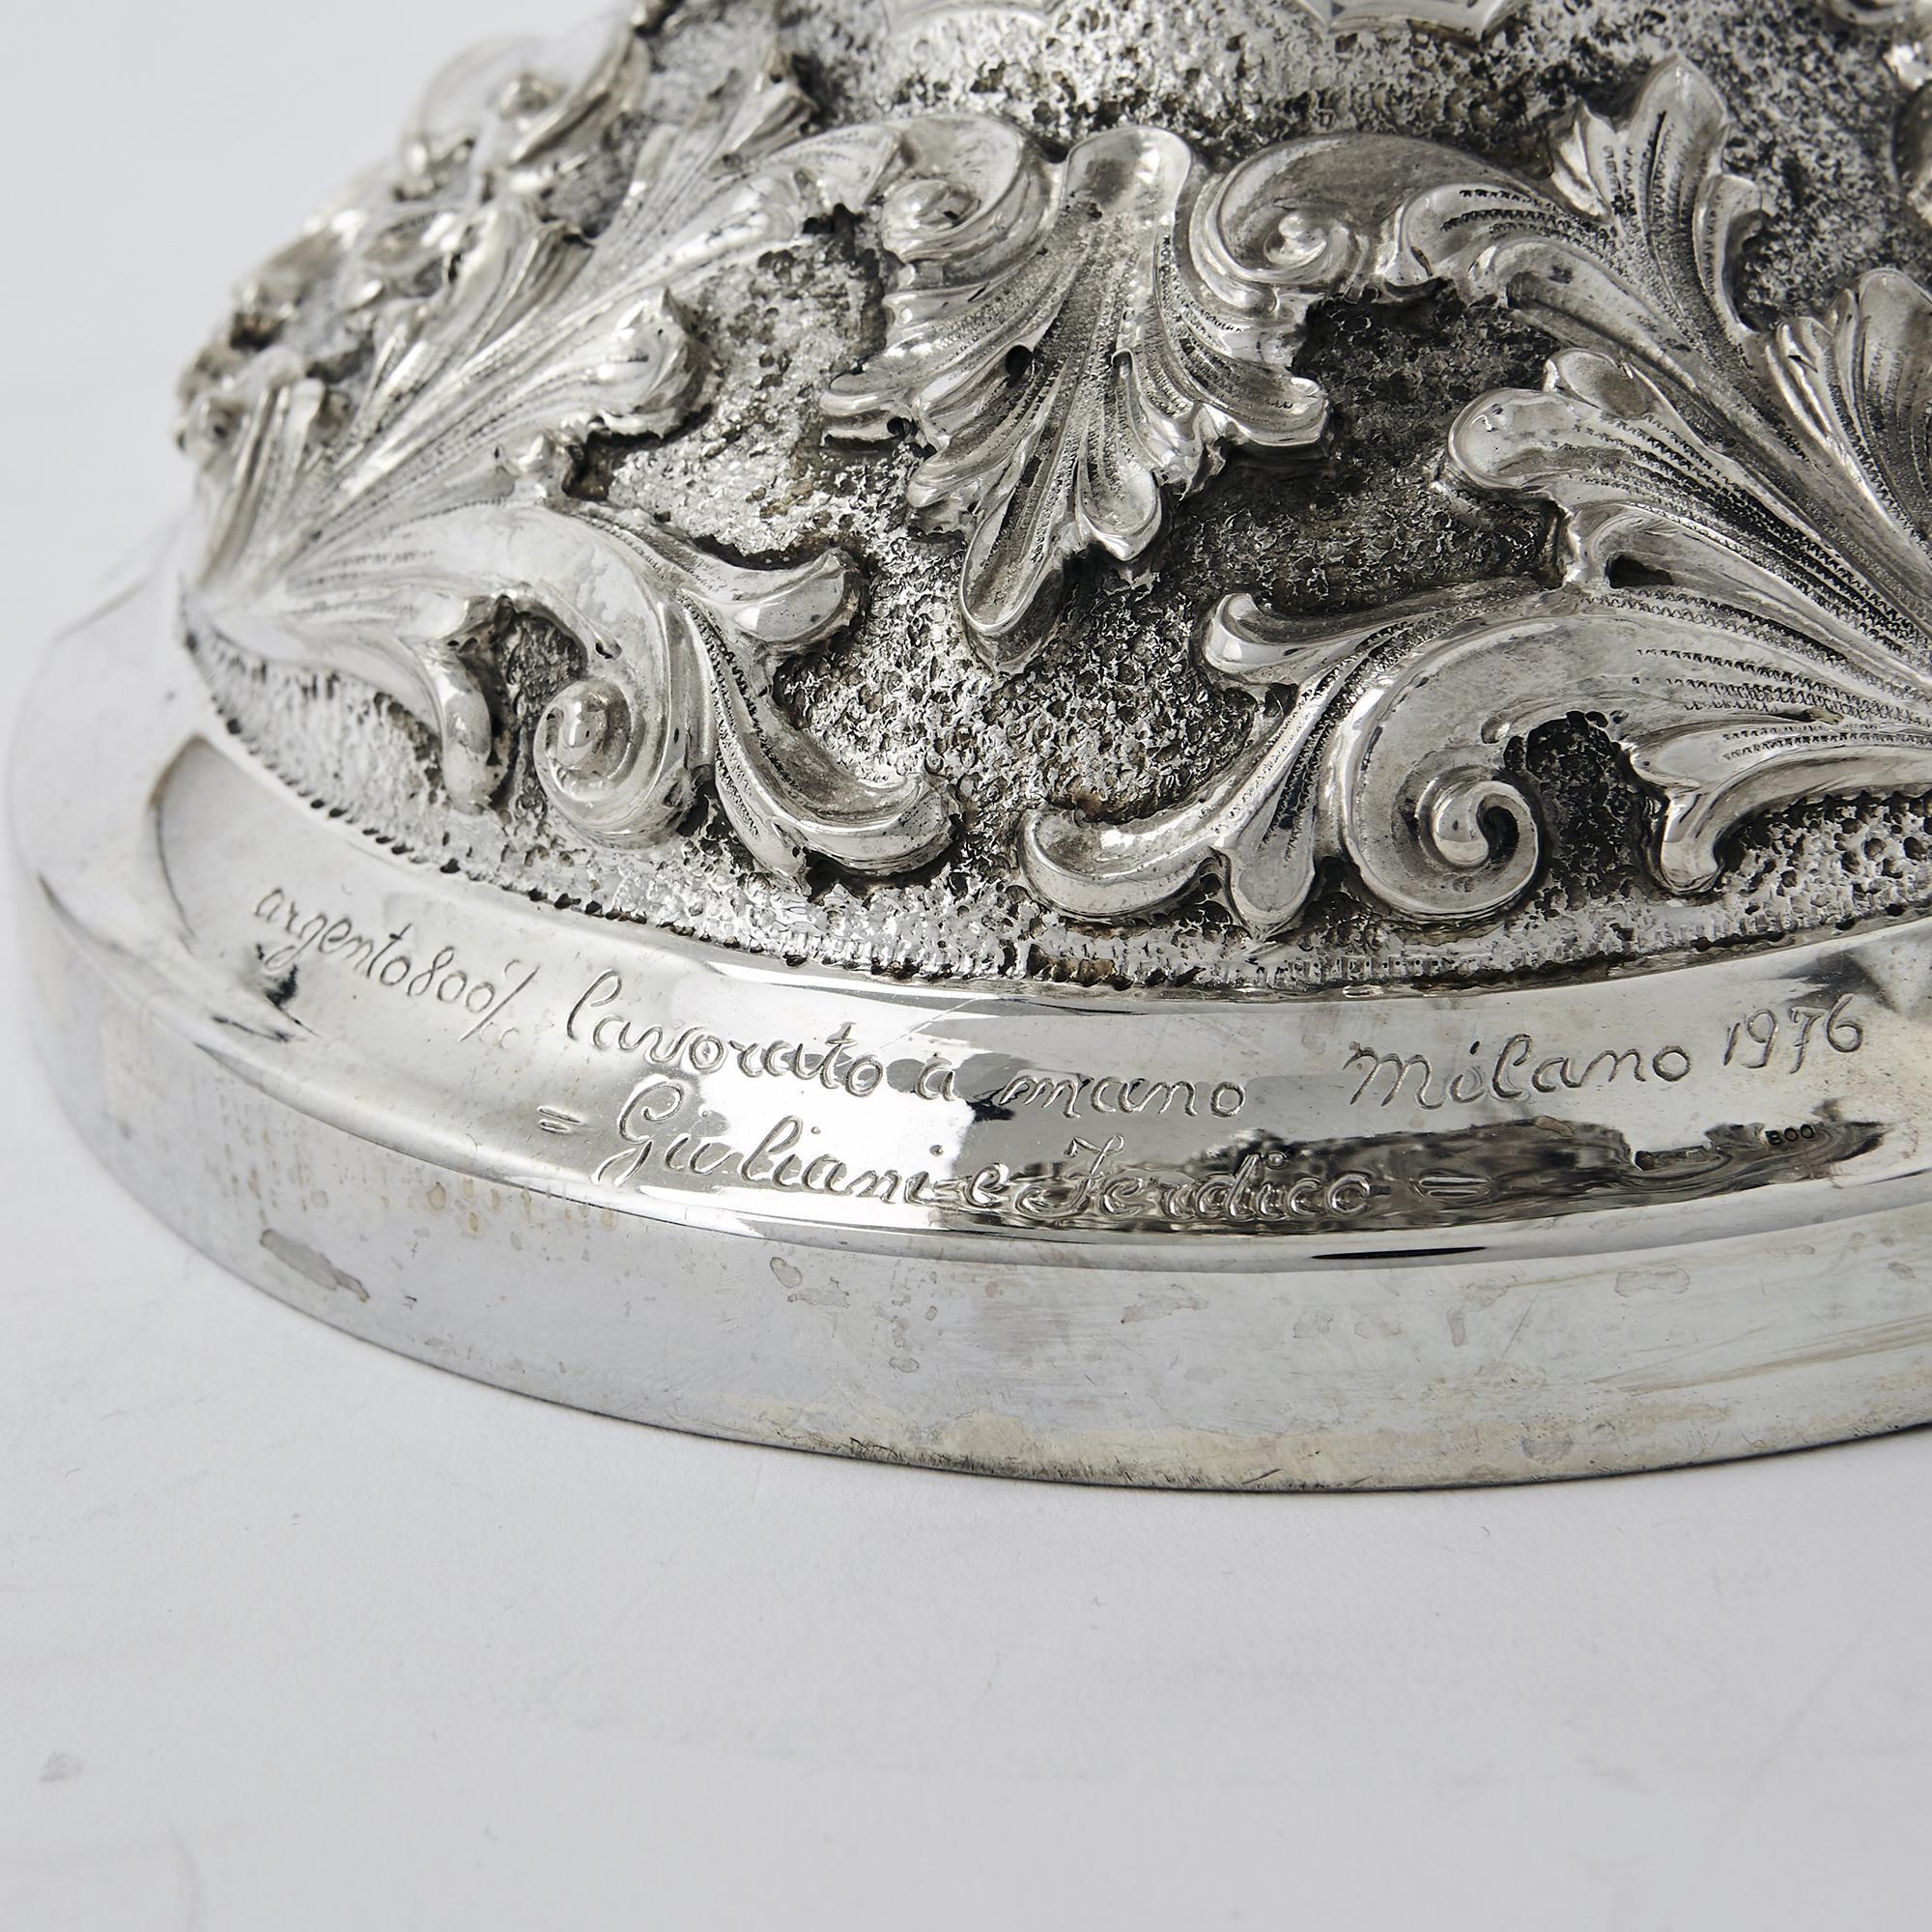 A highly impressive handmade and hand-chased 20th century Italian silver vase in the baroque style. Crafted from 800 silver, the vase is lightly gilded and the decorations are most finely detailed, demonstrating the exemplary skill of the